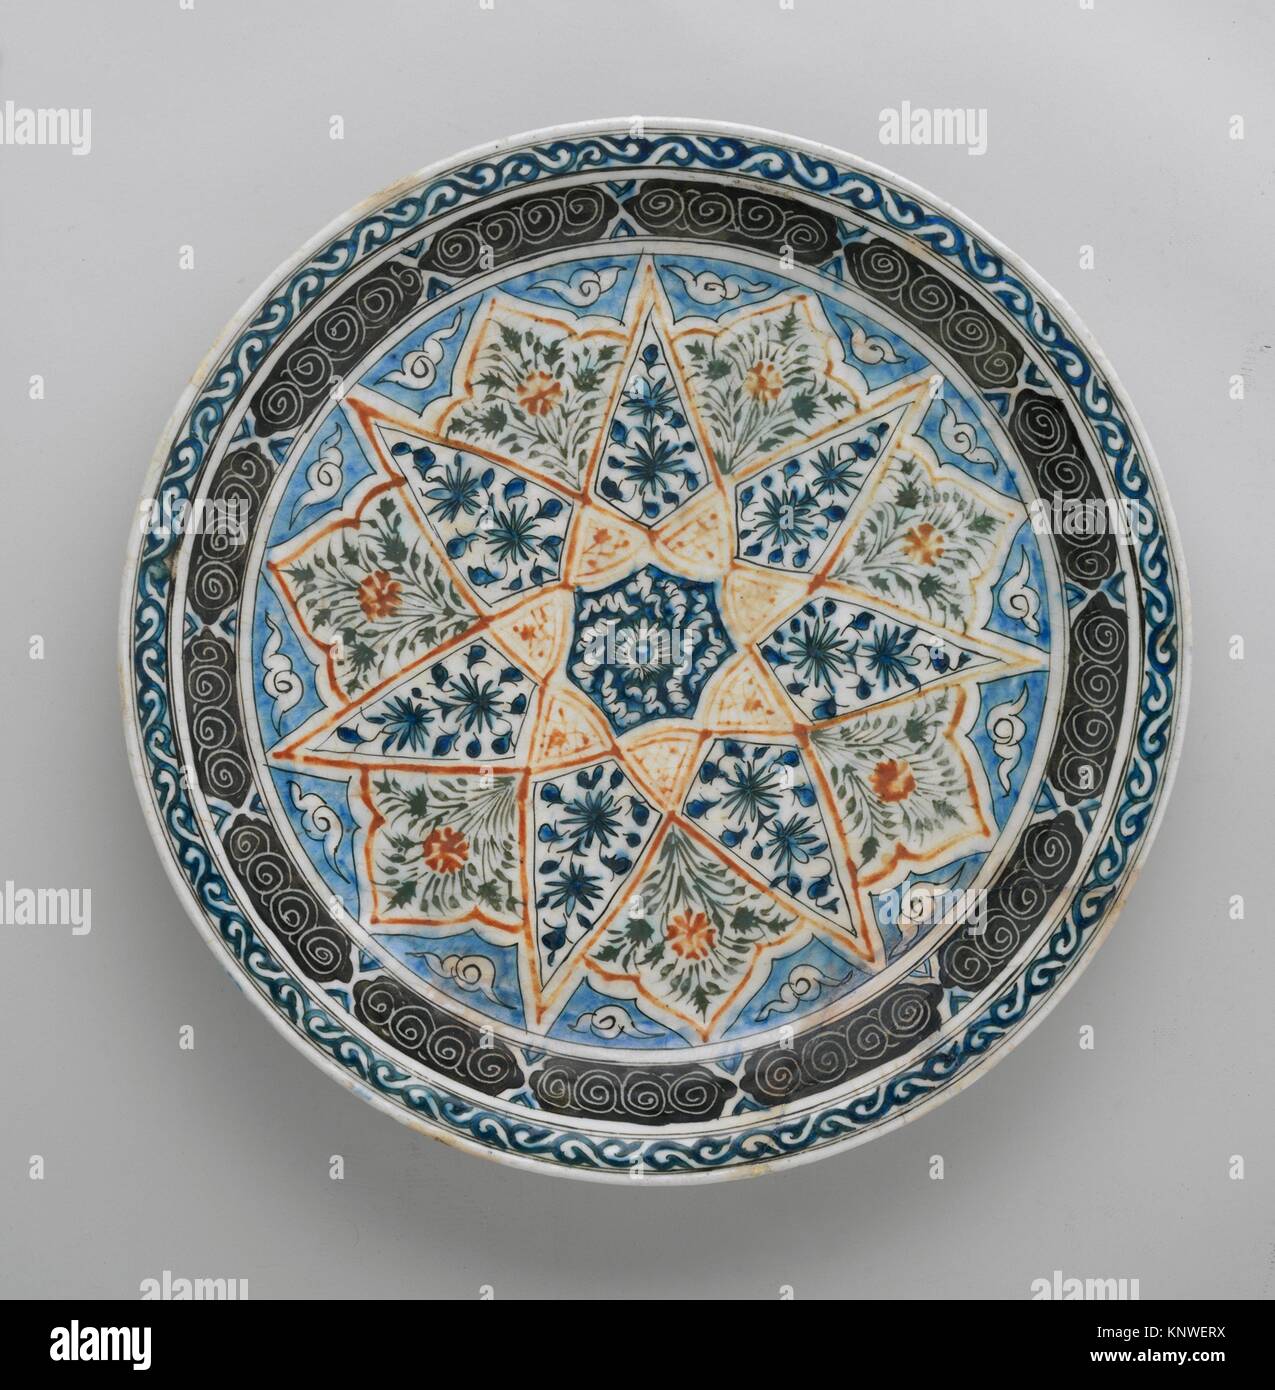 Plate with Vegetal Decoration in a Seven-pointed Star. Object Name: Plate; Date: 17th century; Geography: Attributed to Kirman. Made in Iran; Medium: Stock Photo